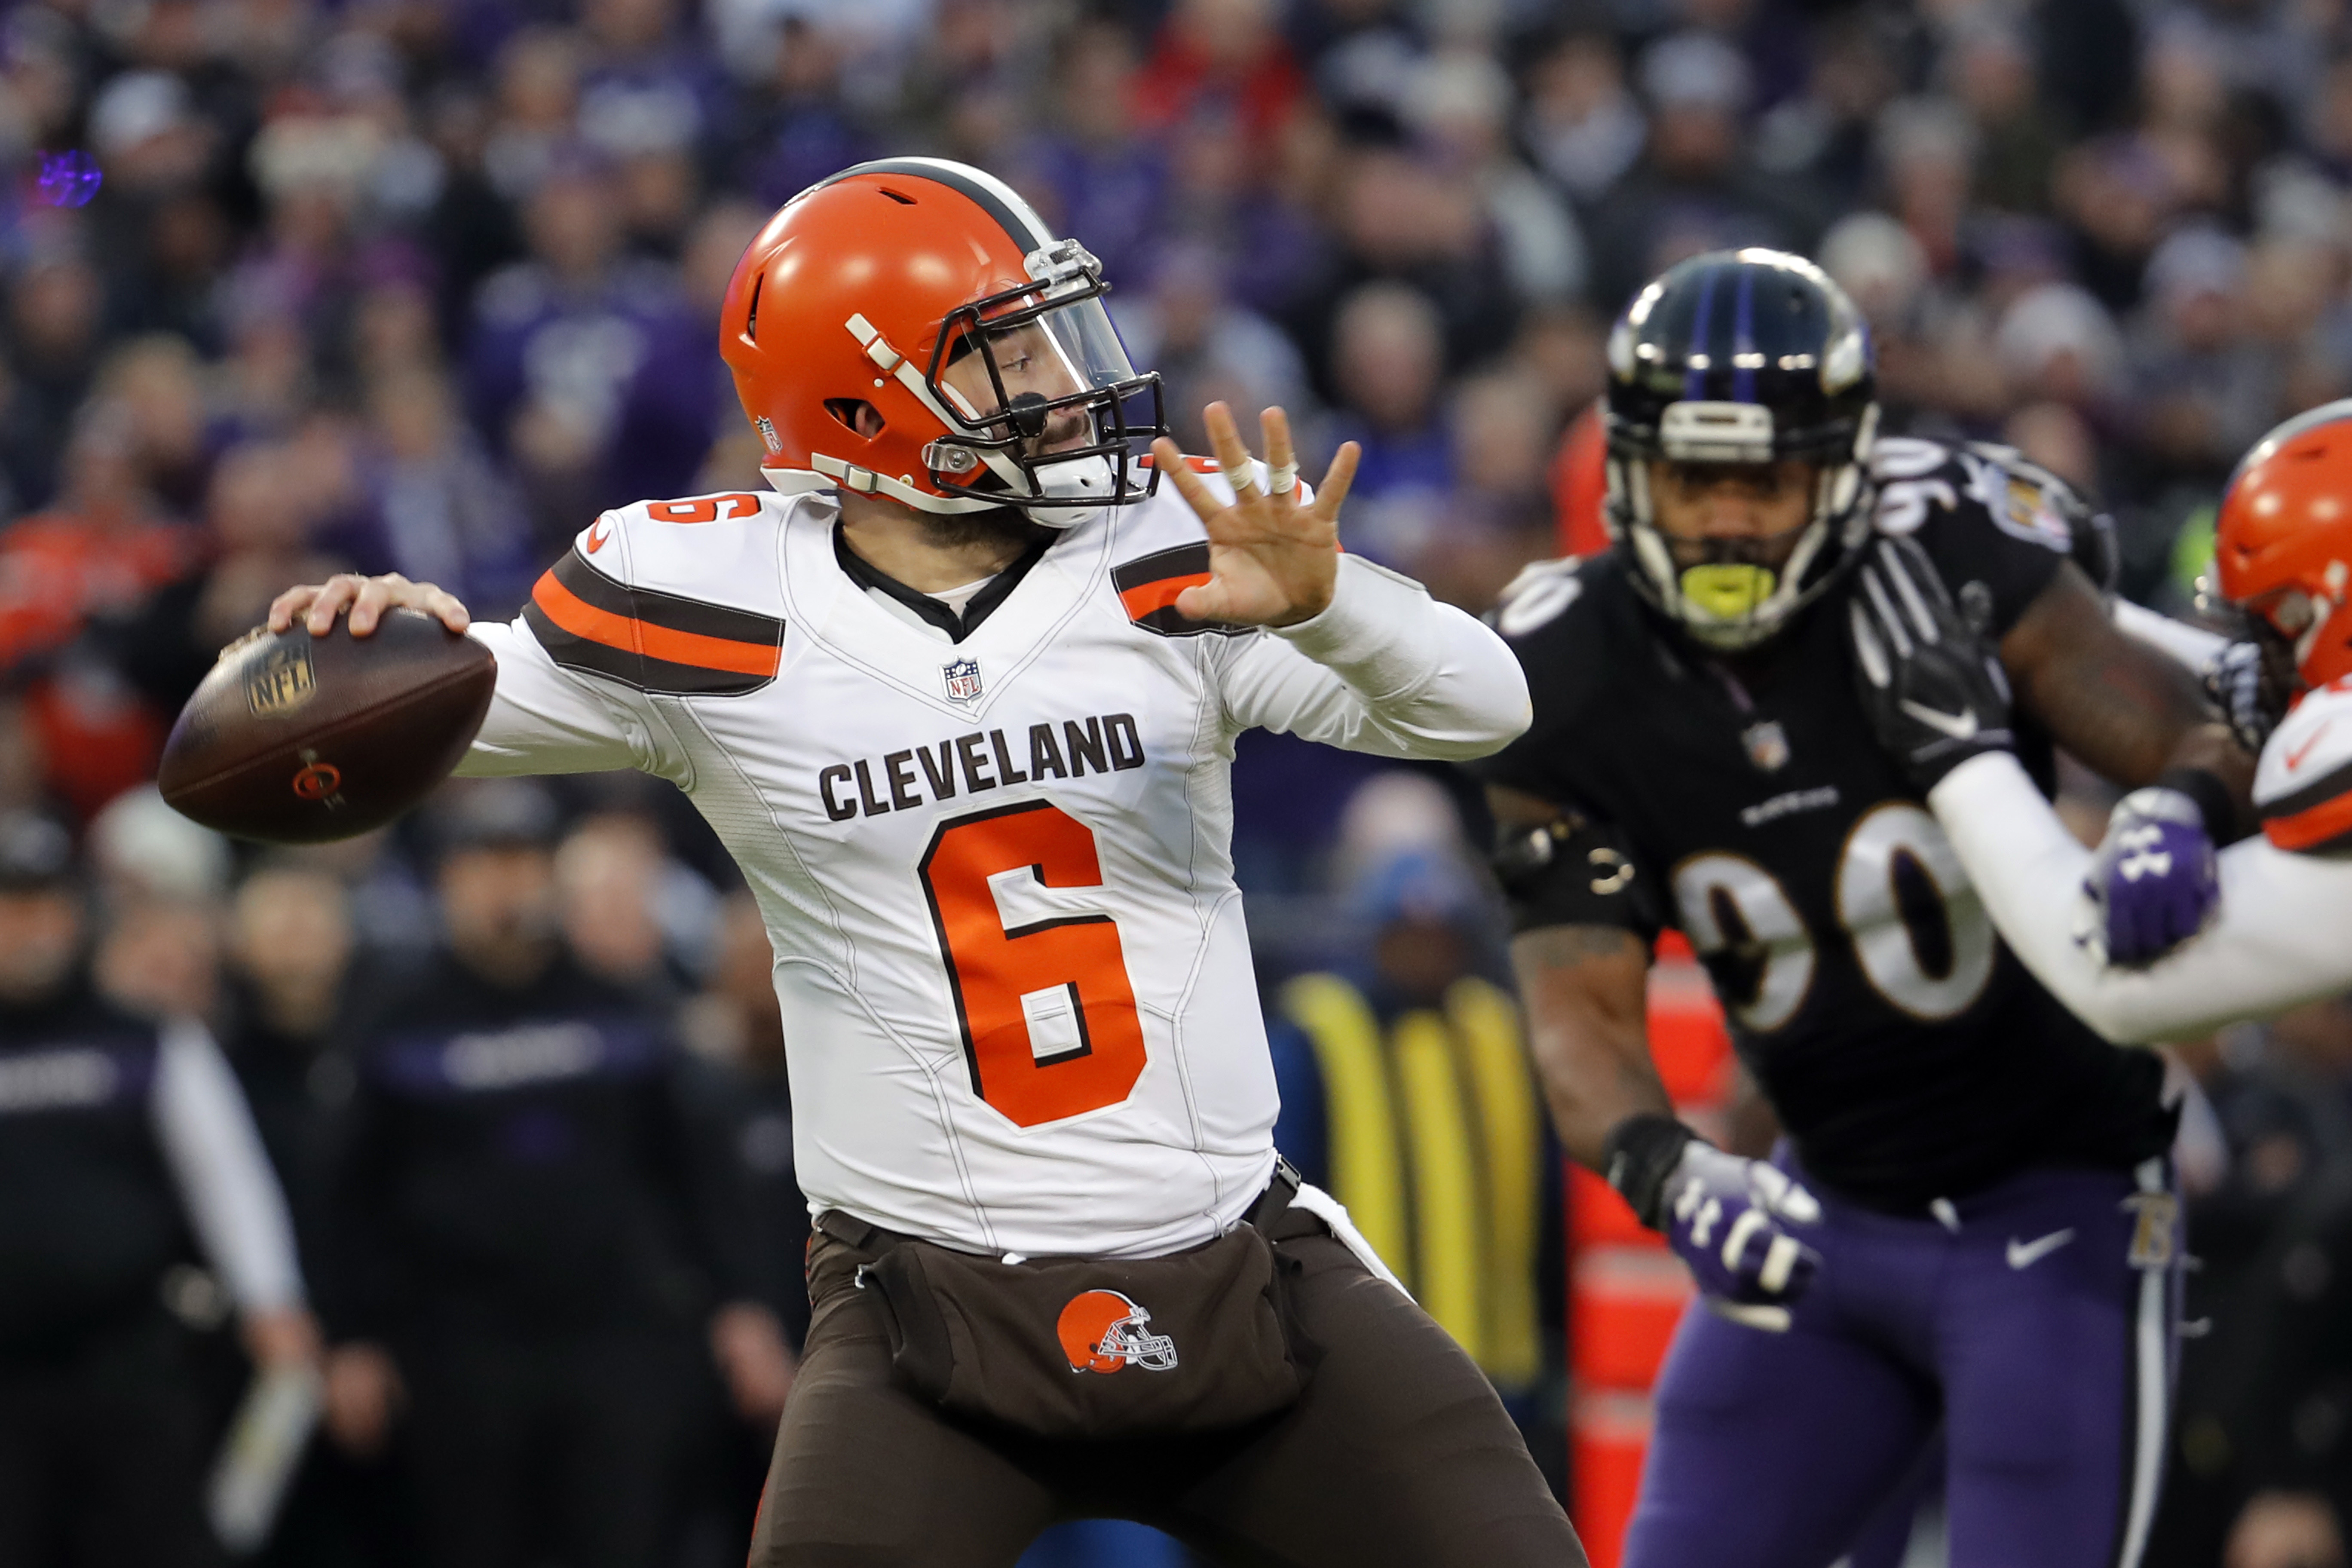 Cleveland Browns have a better chance to win Super Bowl 54 than 17 teams,  according to latest odds